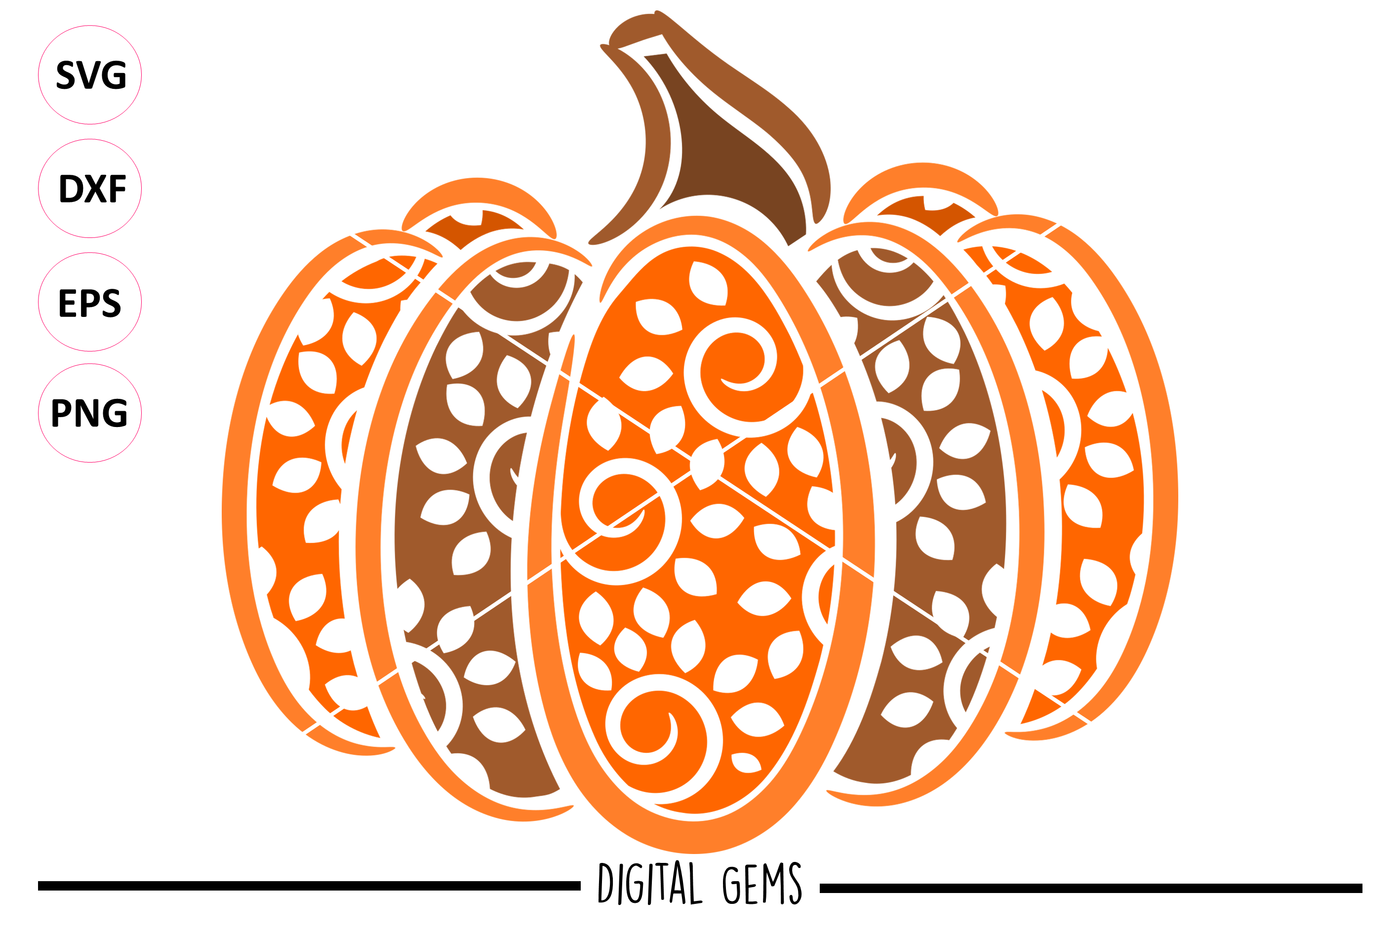 ori 3483395 7b70fae6d167ef31d280d63a1f3ed439e1bca113 pumpkin svg dxf eps png files